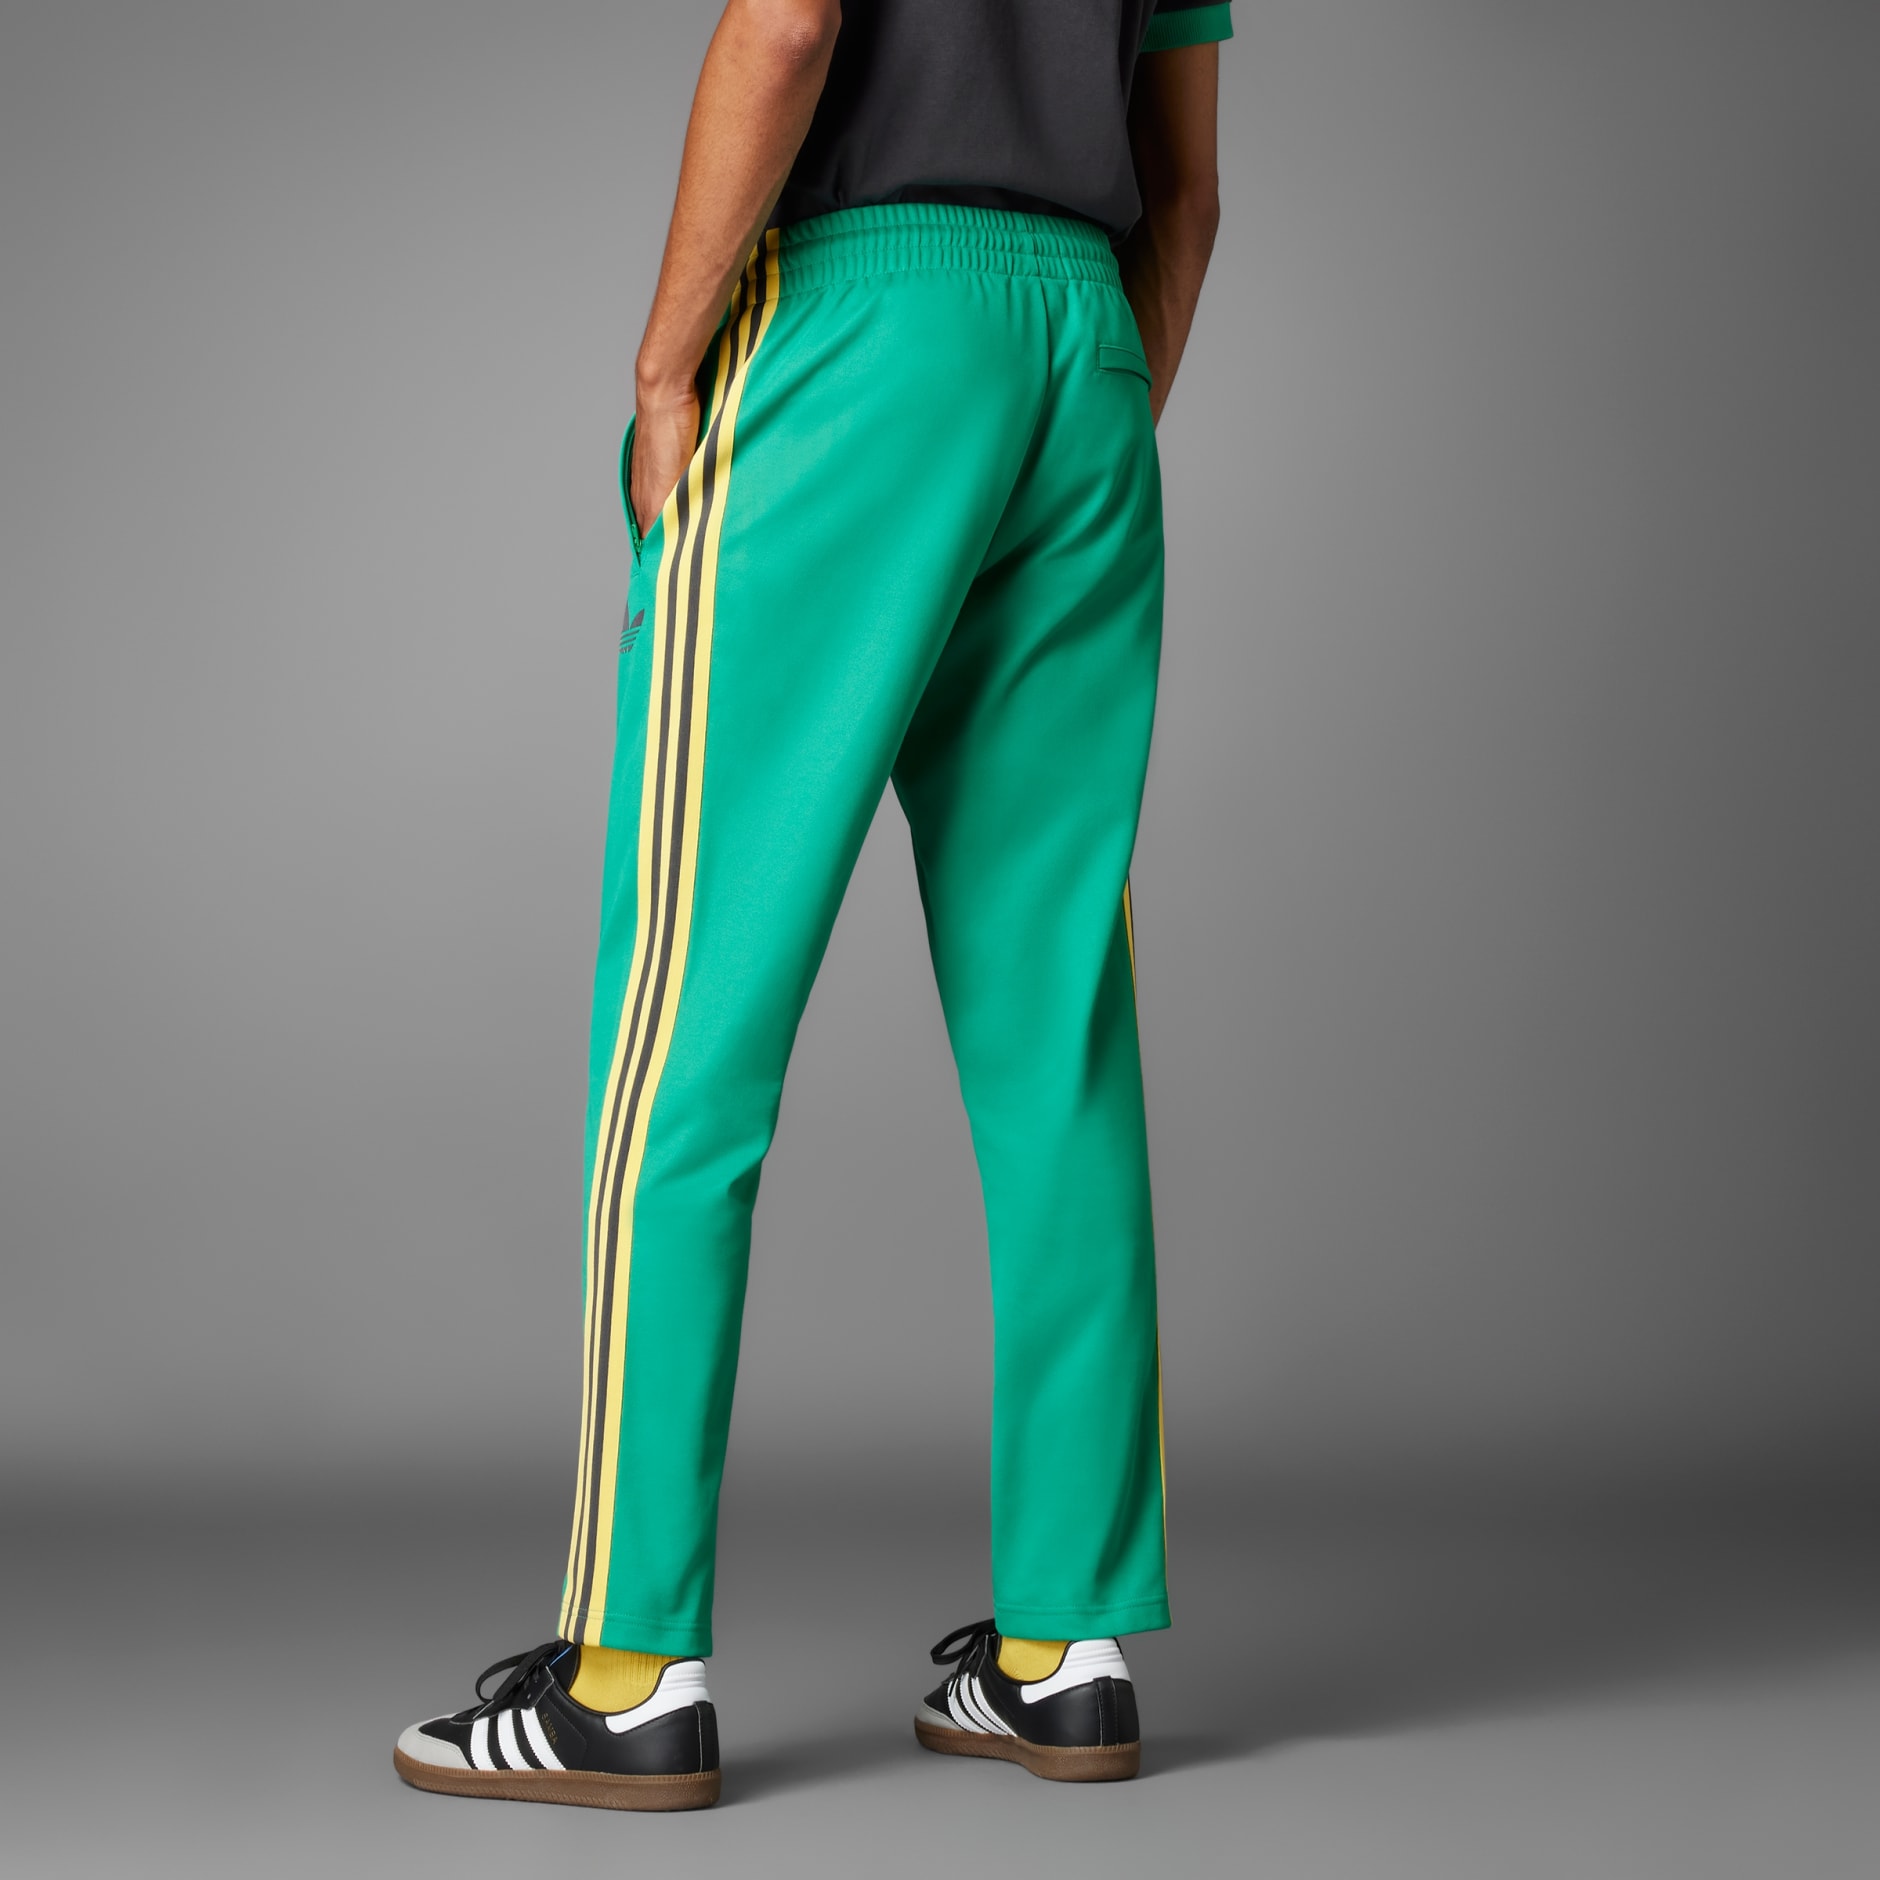 Relaxed Fit Terry Track Pants - Bright green - Men | H&M US